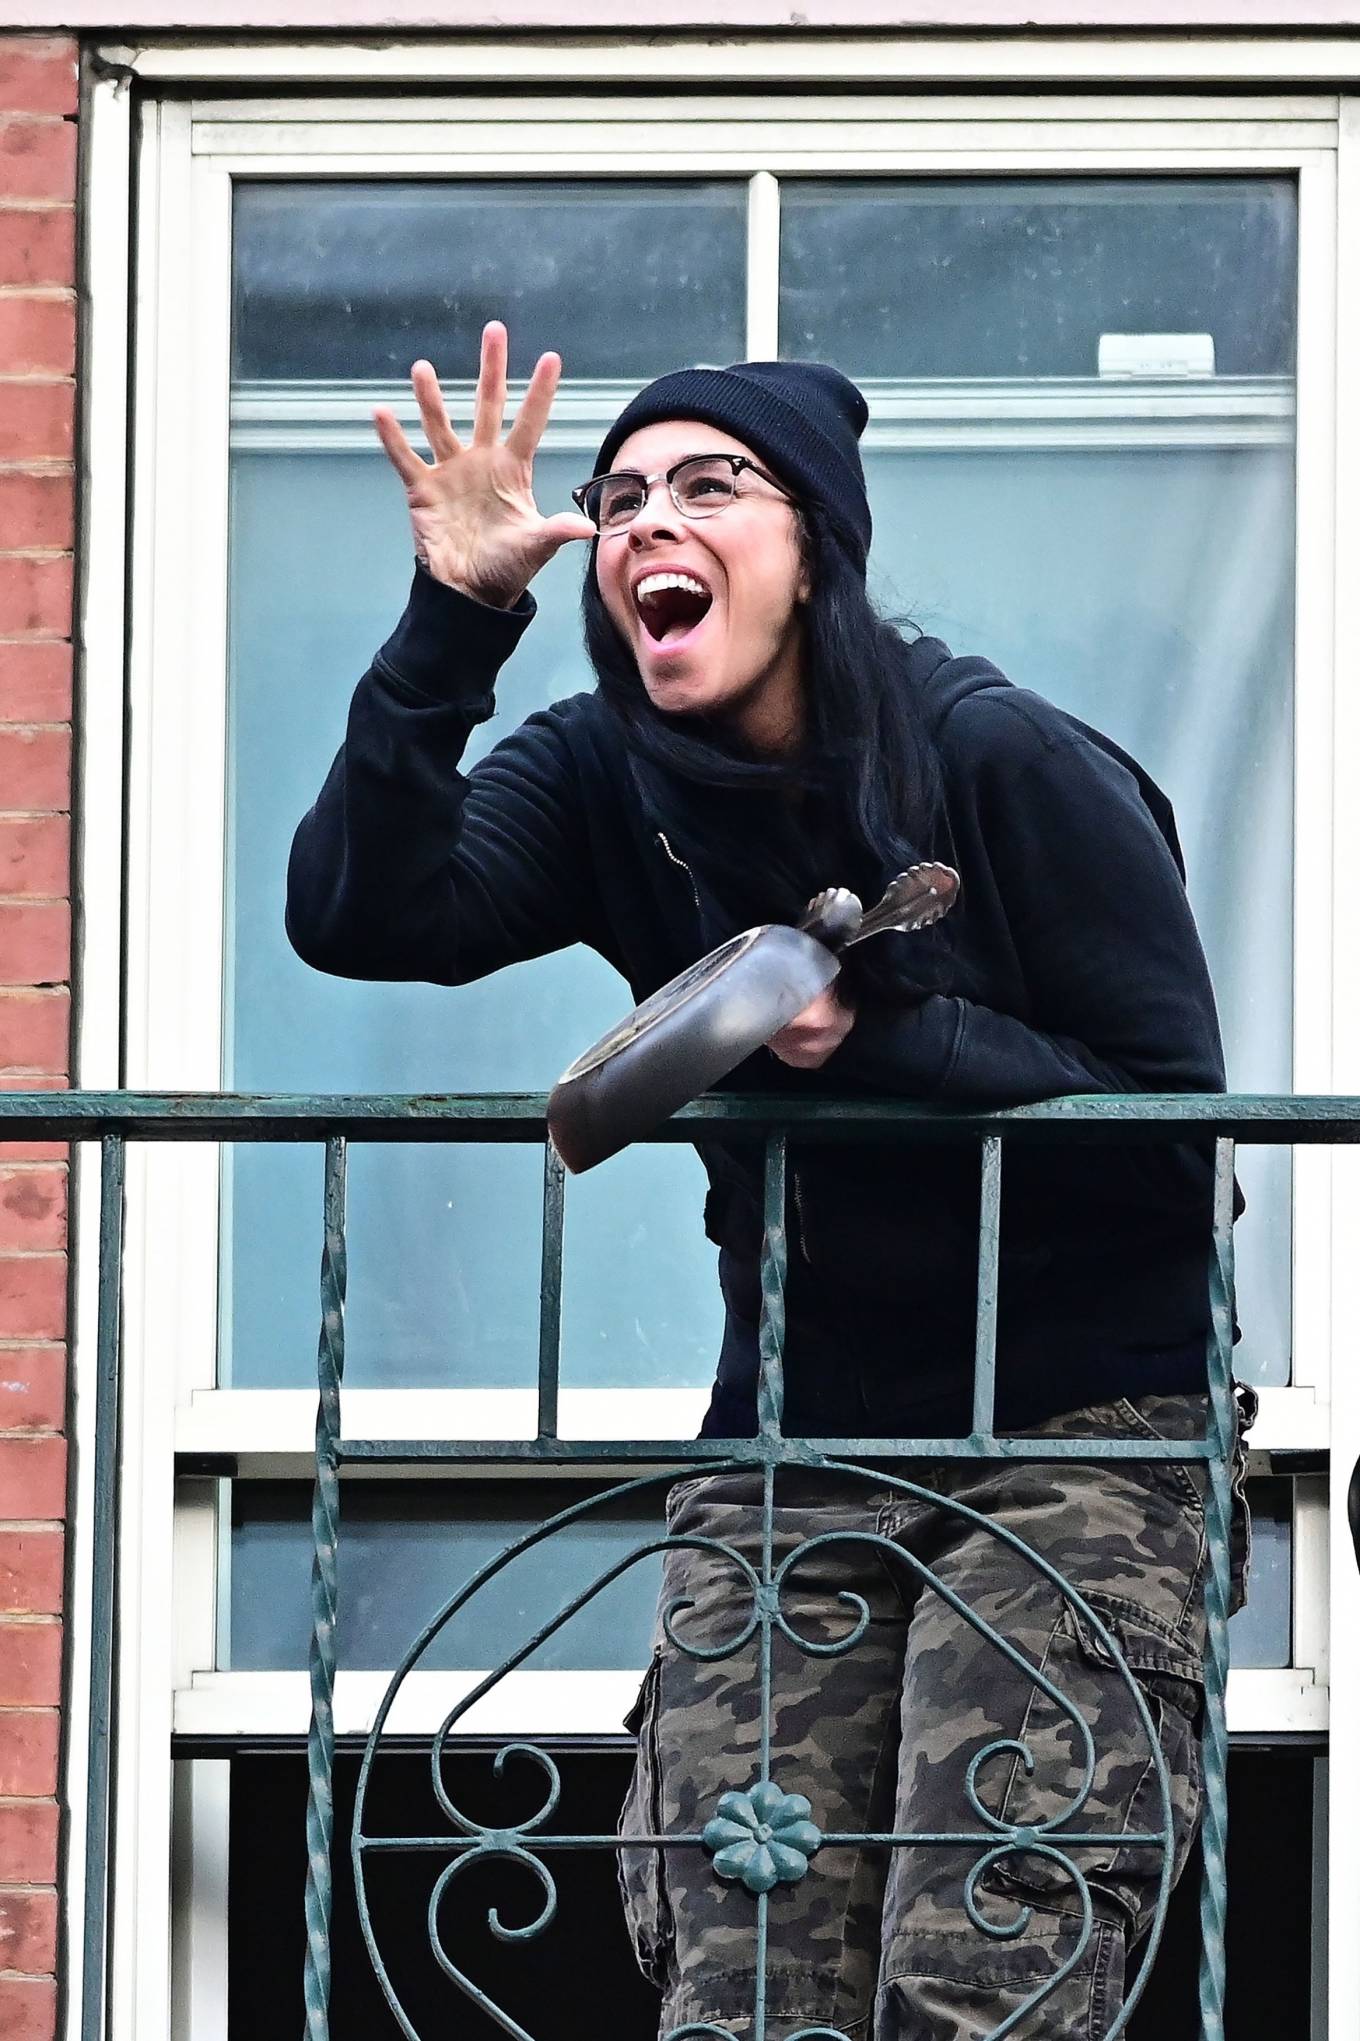 Sarah Silverman - Walking out to her balcony in New York